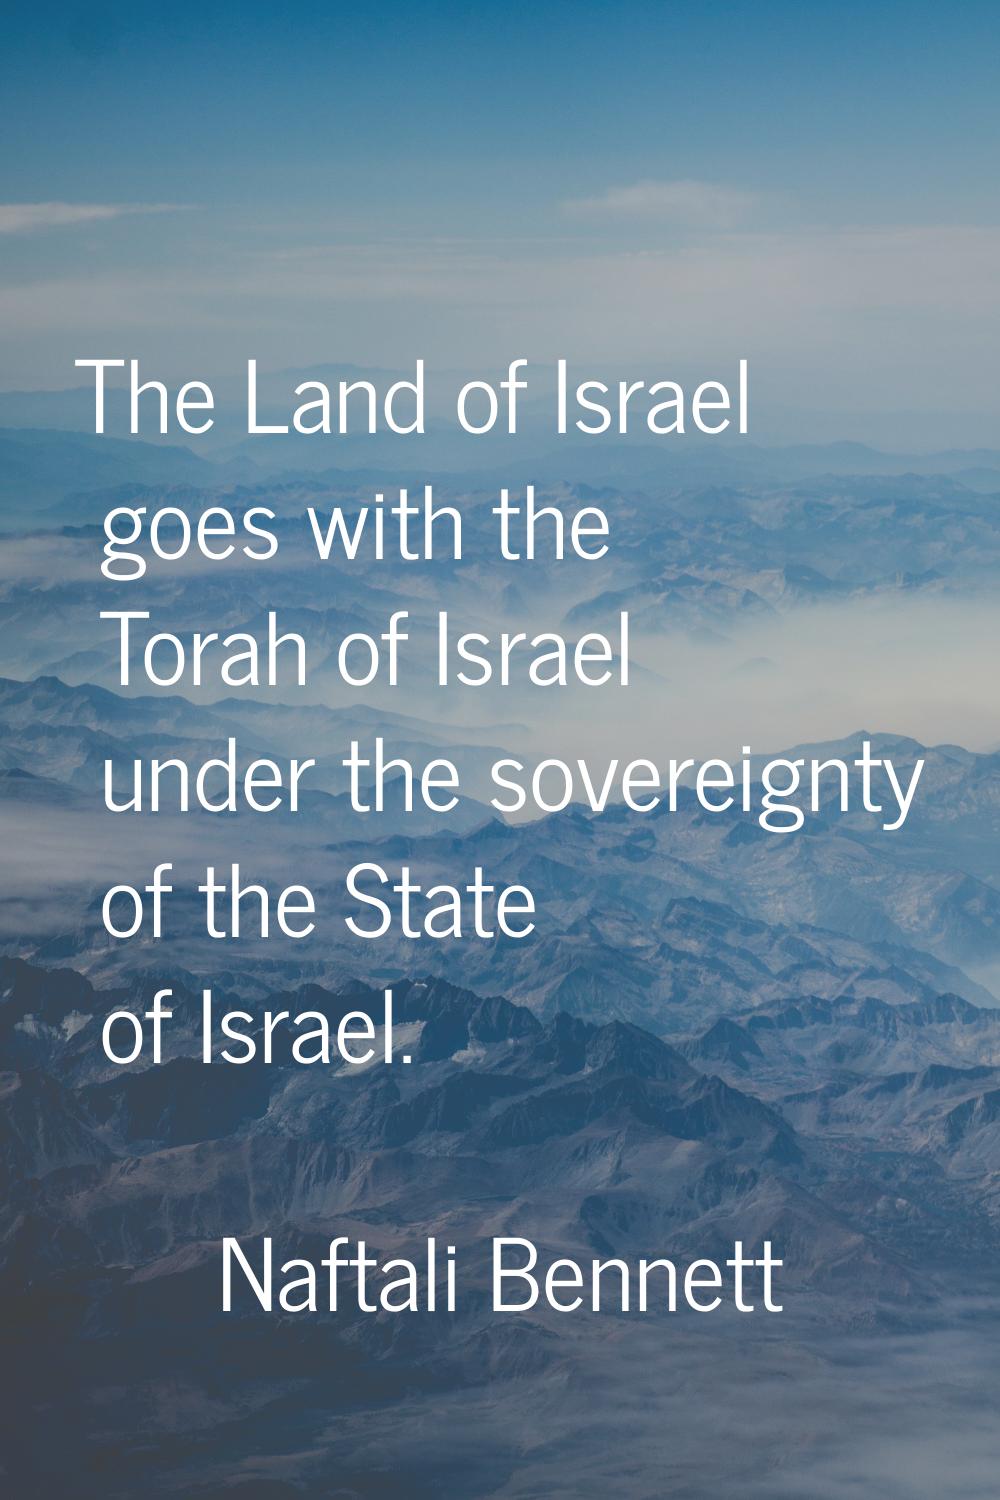 The Land of Israel goes with the Torah of Israel under the sovereignty of the State of Israel.